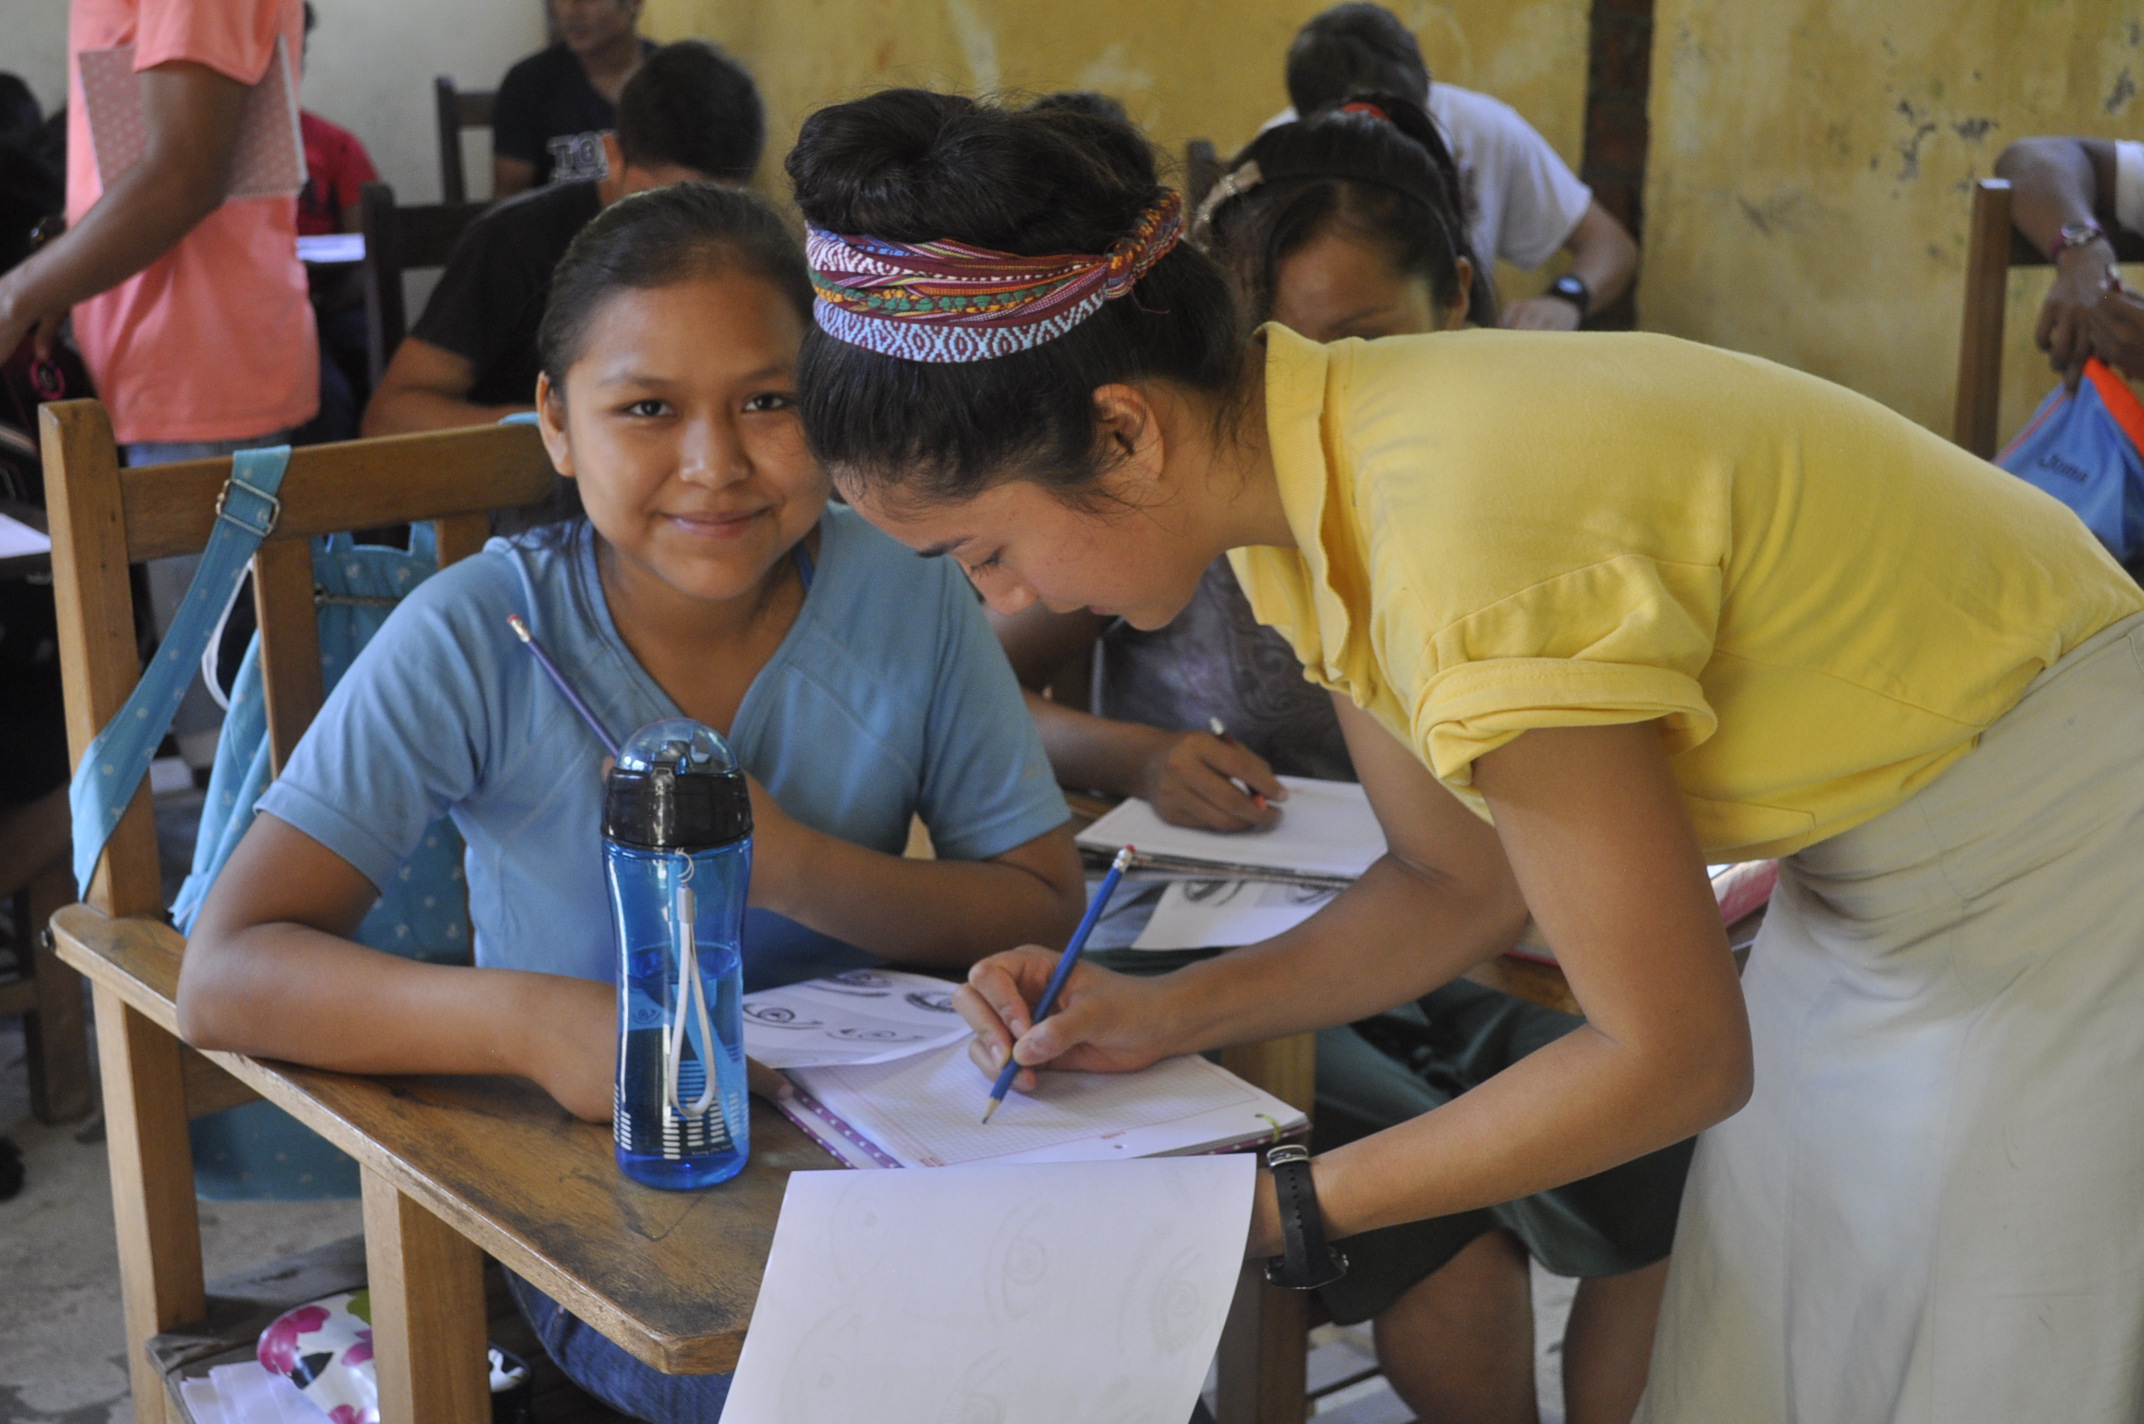 A Southern volunteer helps a Bolivian student at her desk